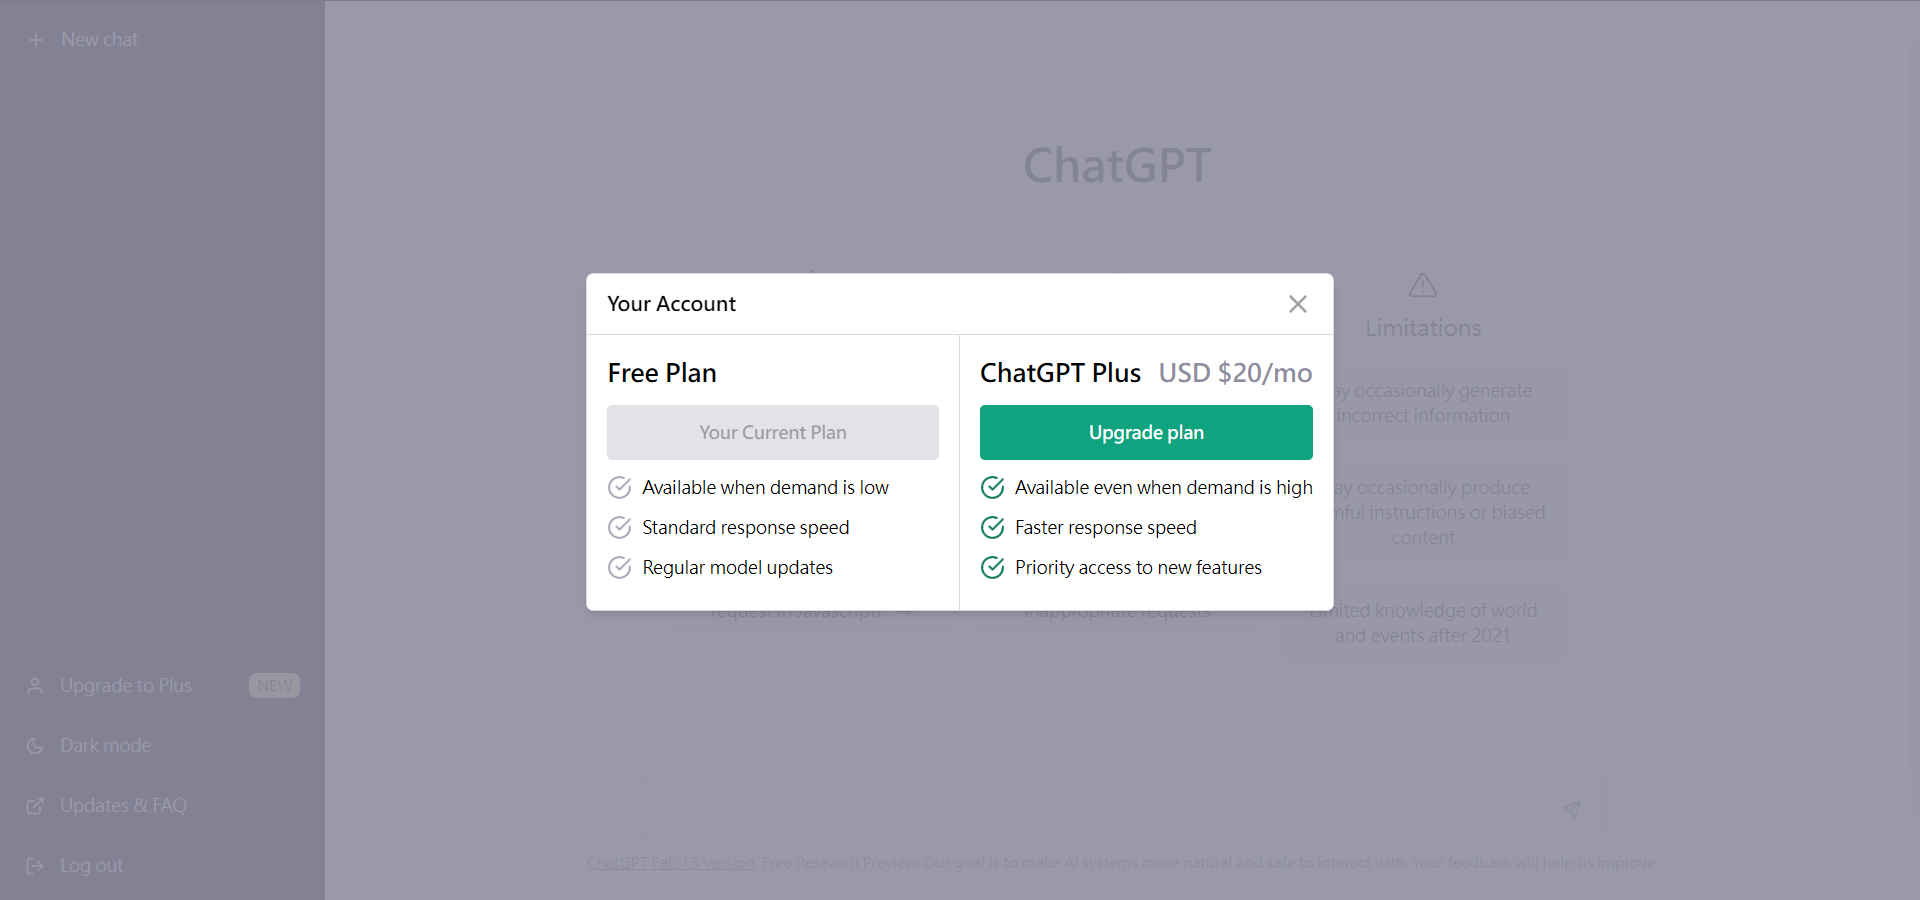 Free Plan And ChatGPT Plus